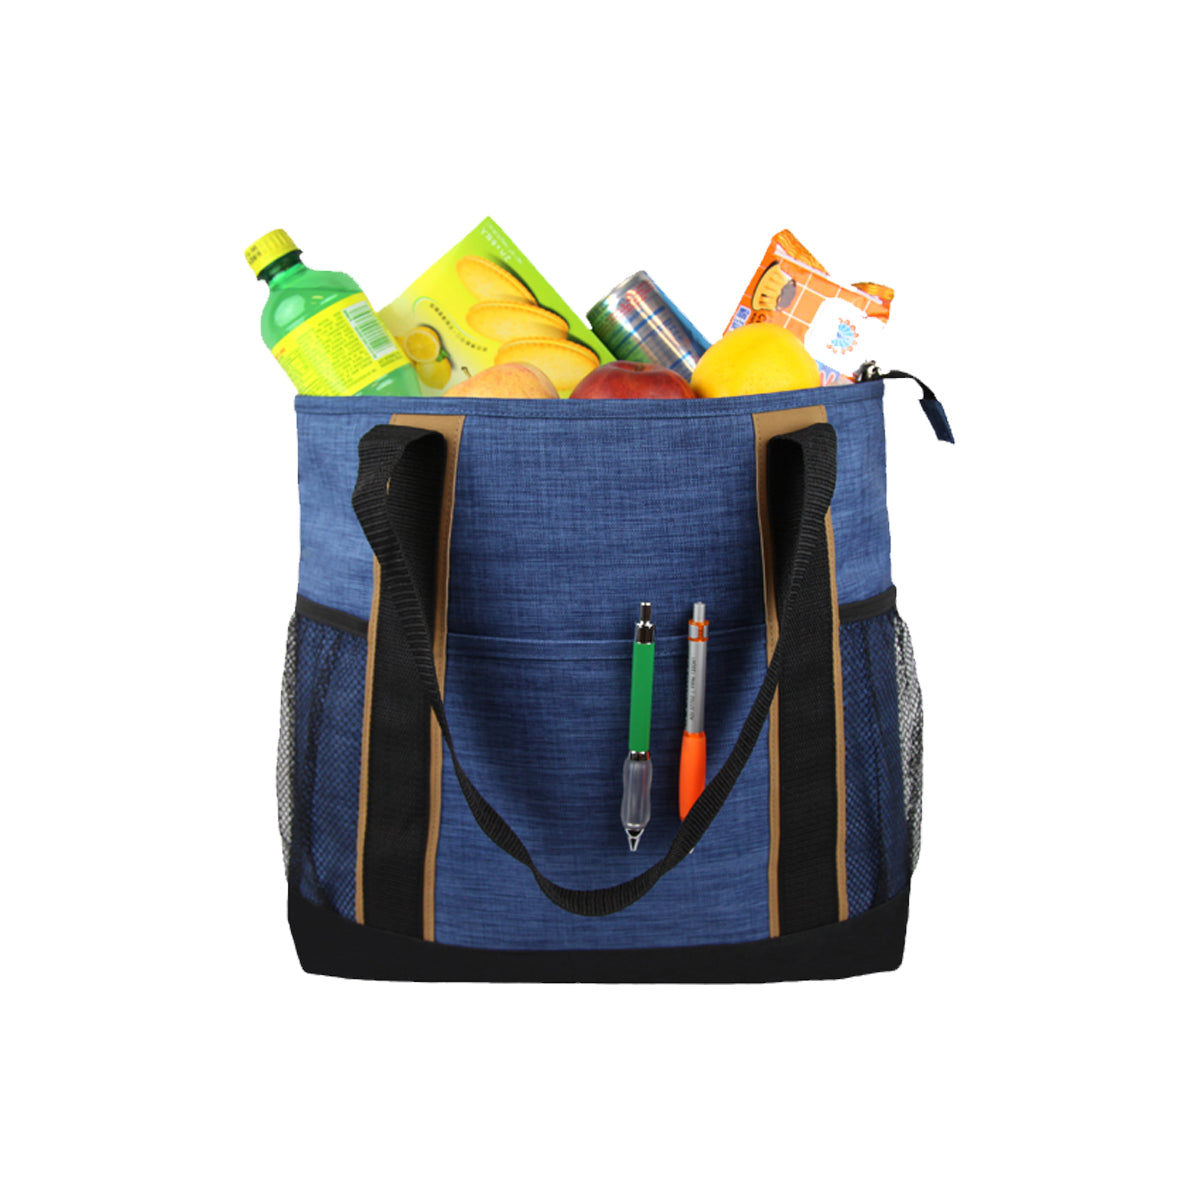 THE COOLER TOTE